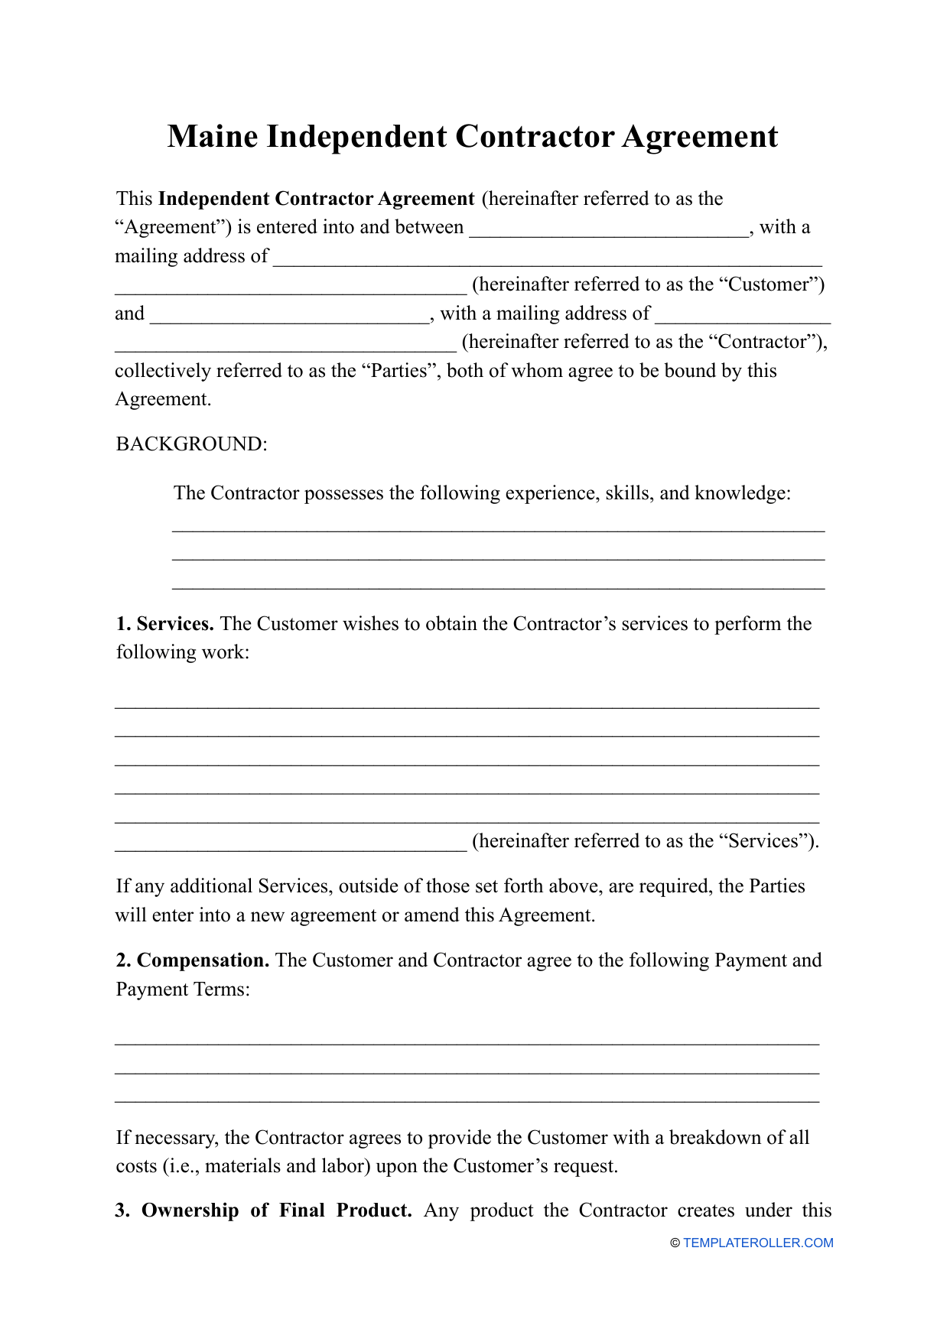 Independent Contractor Agreement Template - Maine, Page 1